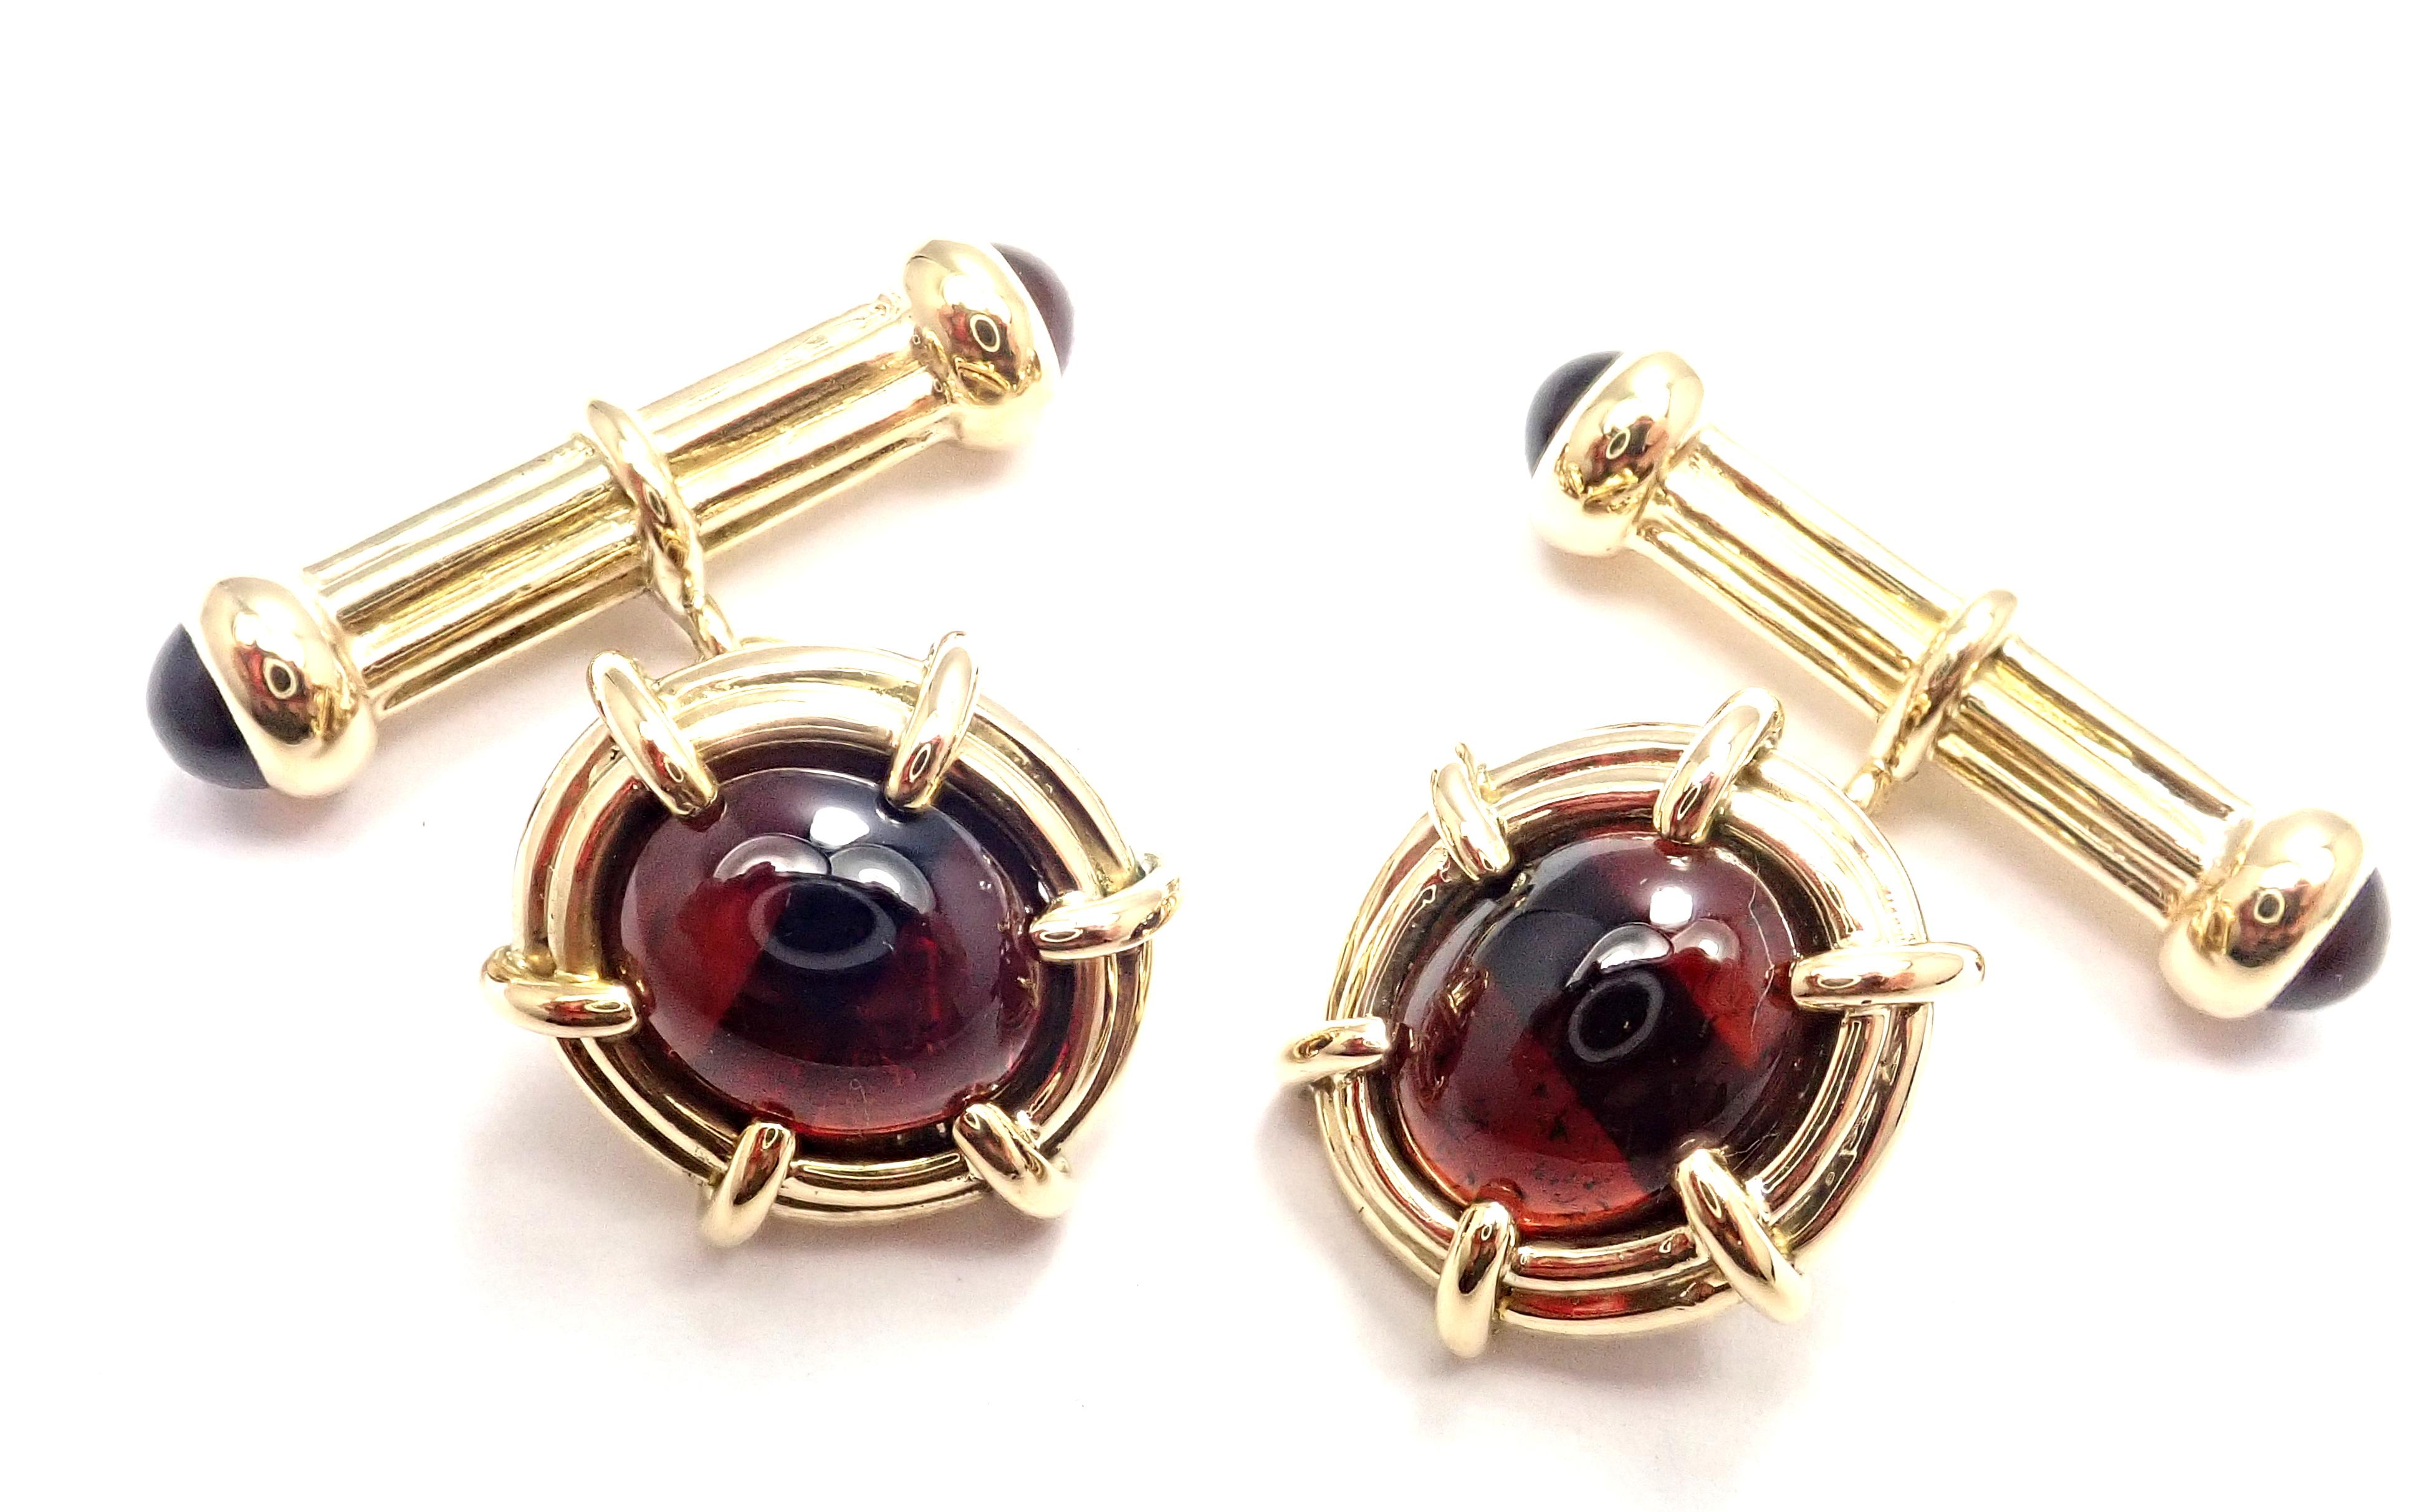 18k Yellow Gold Garnet Cufflinks by Jean Schlumberger for Tiffany Co. 
With 6 cabochon garnet stones
two larger garnets are 12mm x 11mm
Details: 
Measurements: 28mm x 19mm x 19mm
Weight: 22.5 grams
Stamped Hallmarks: Tiffany & Co Schlumberger